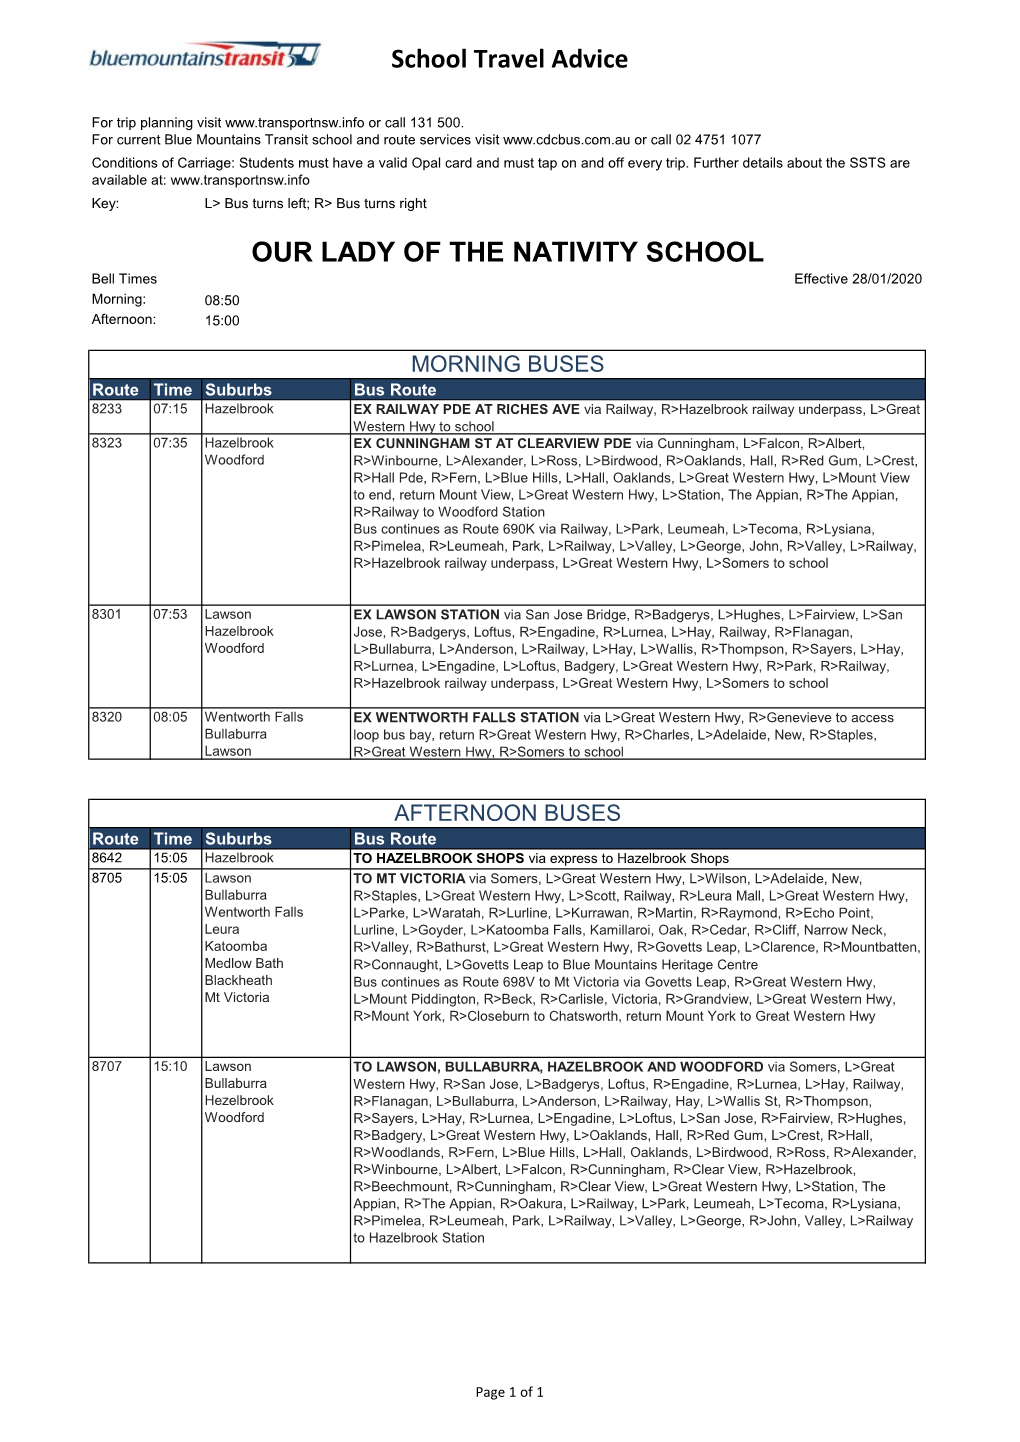 School Travel Advice OUR LADY of the NATIVITY SCHOOL